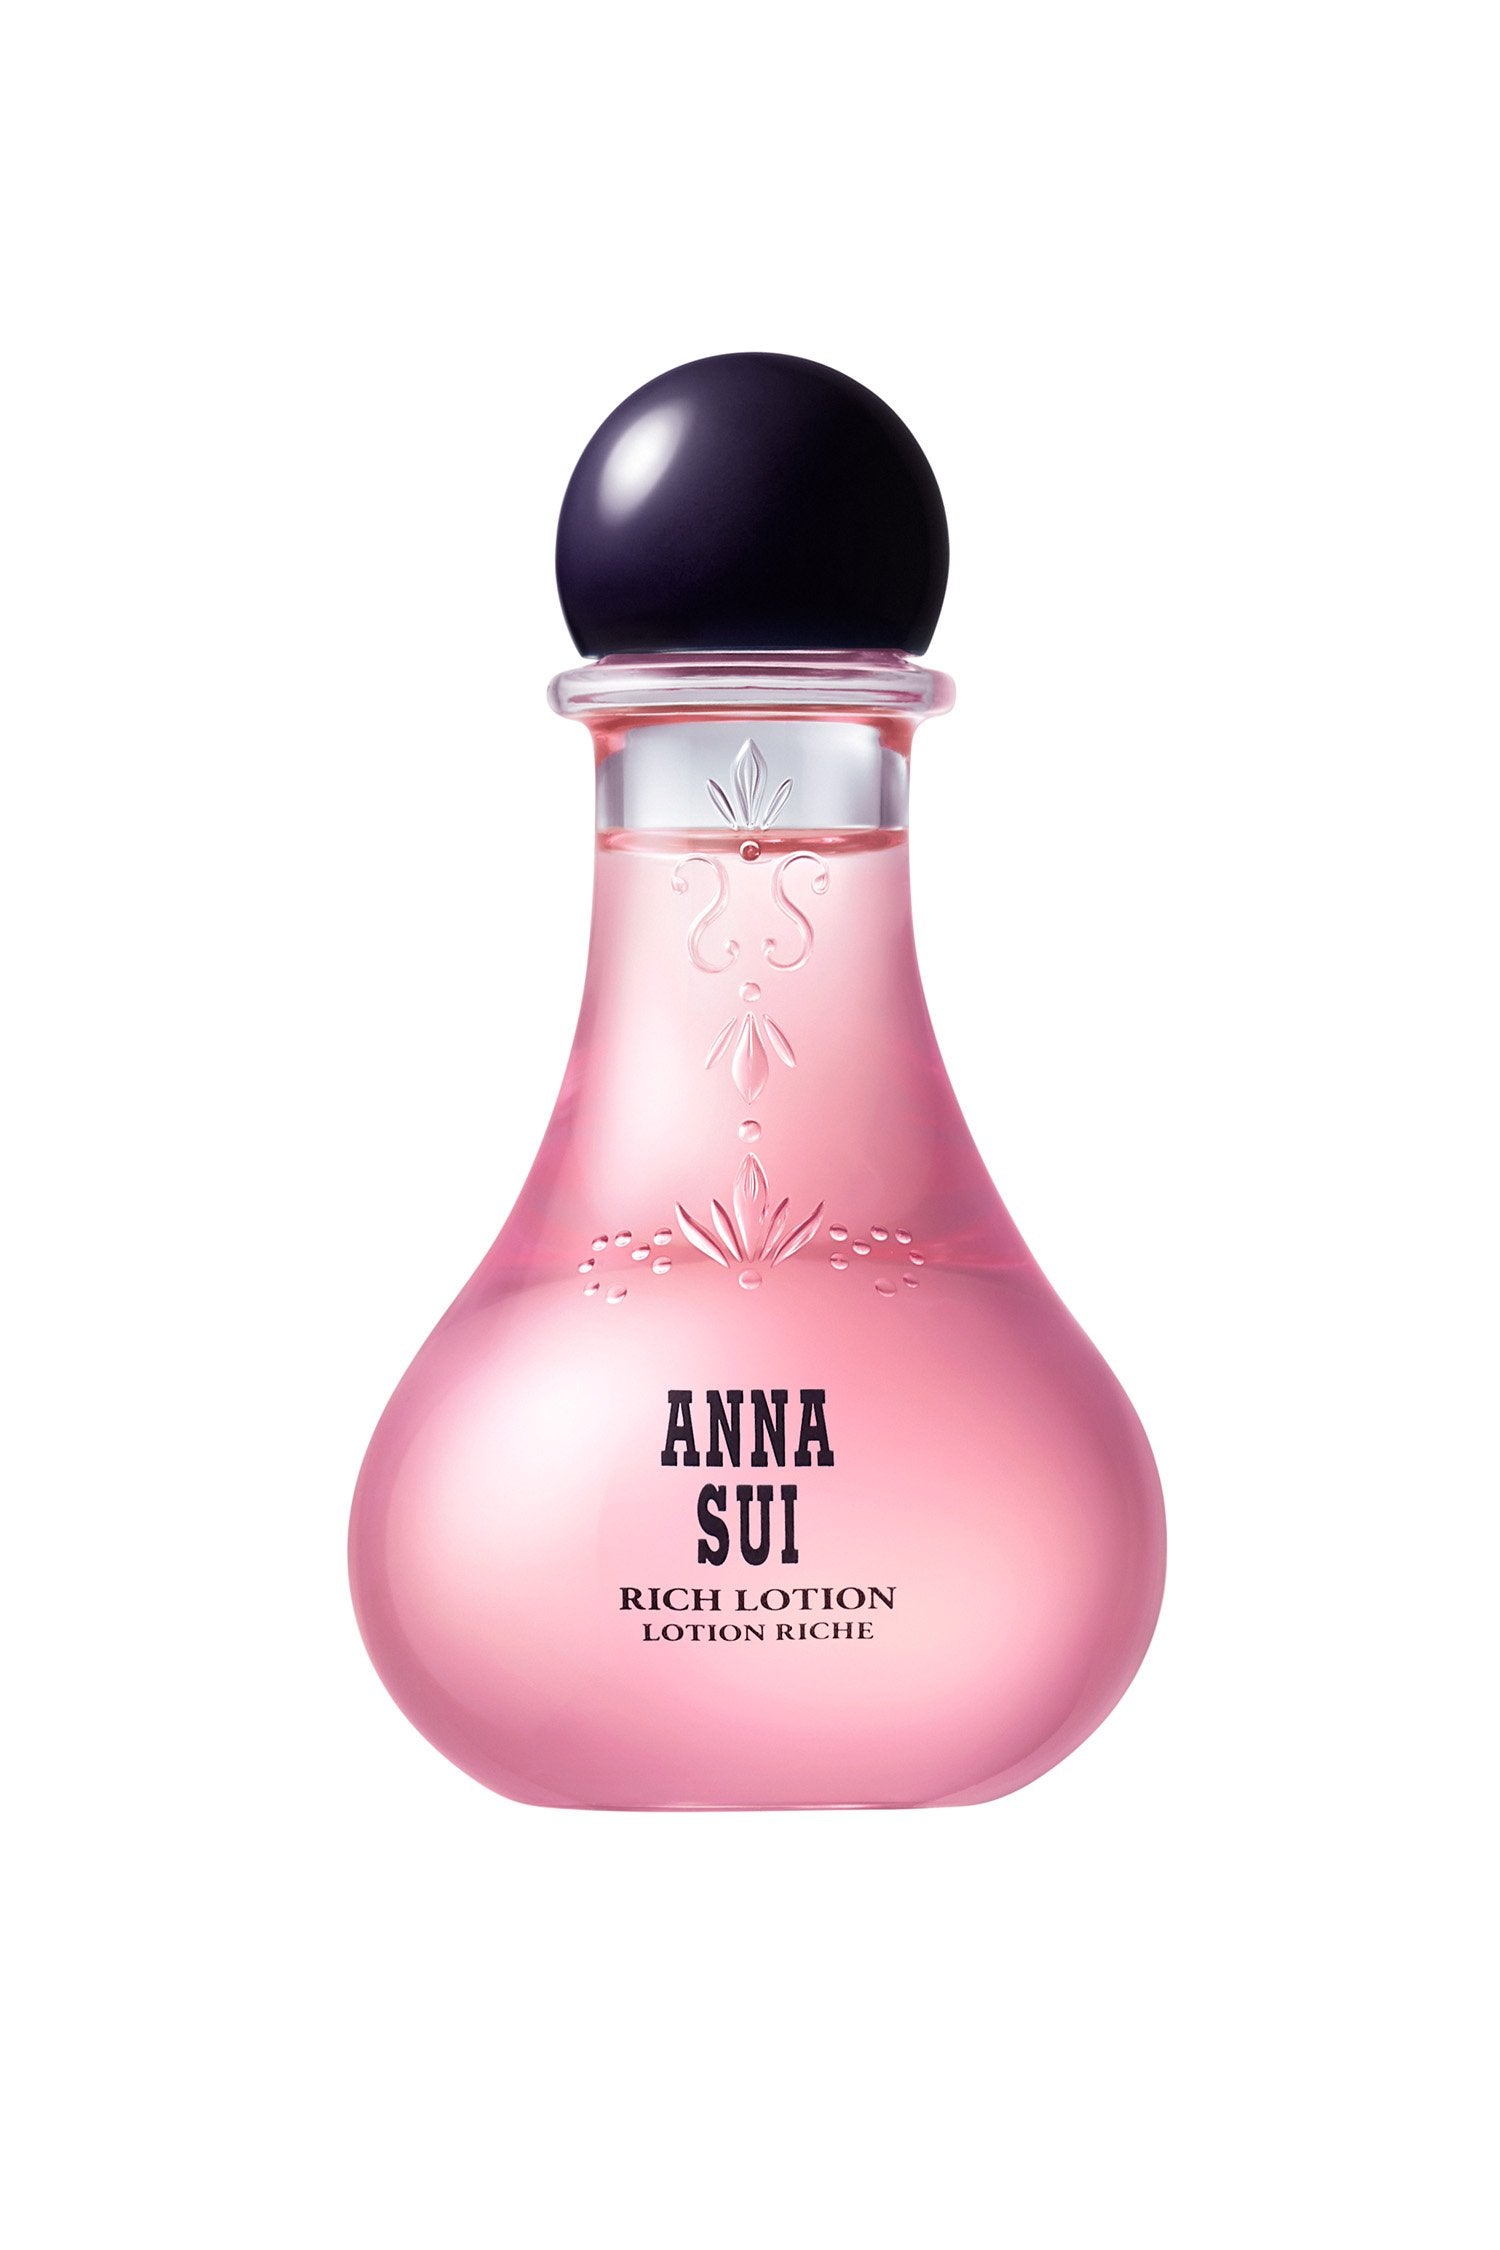 In a transparent pink, bulb-shaped container, floral design and Anna branding, a round cap on top